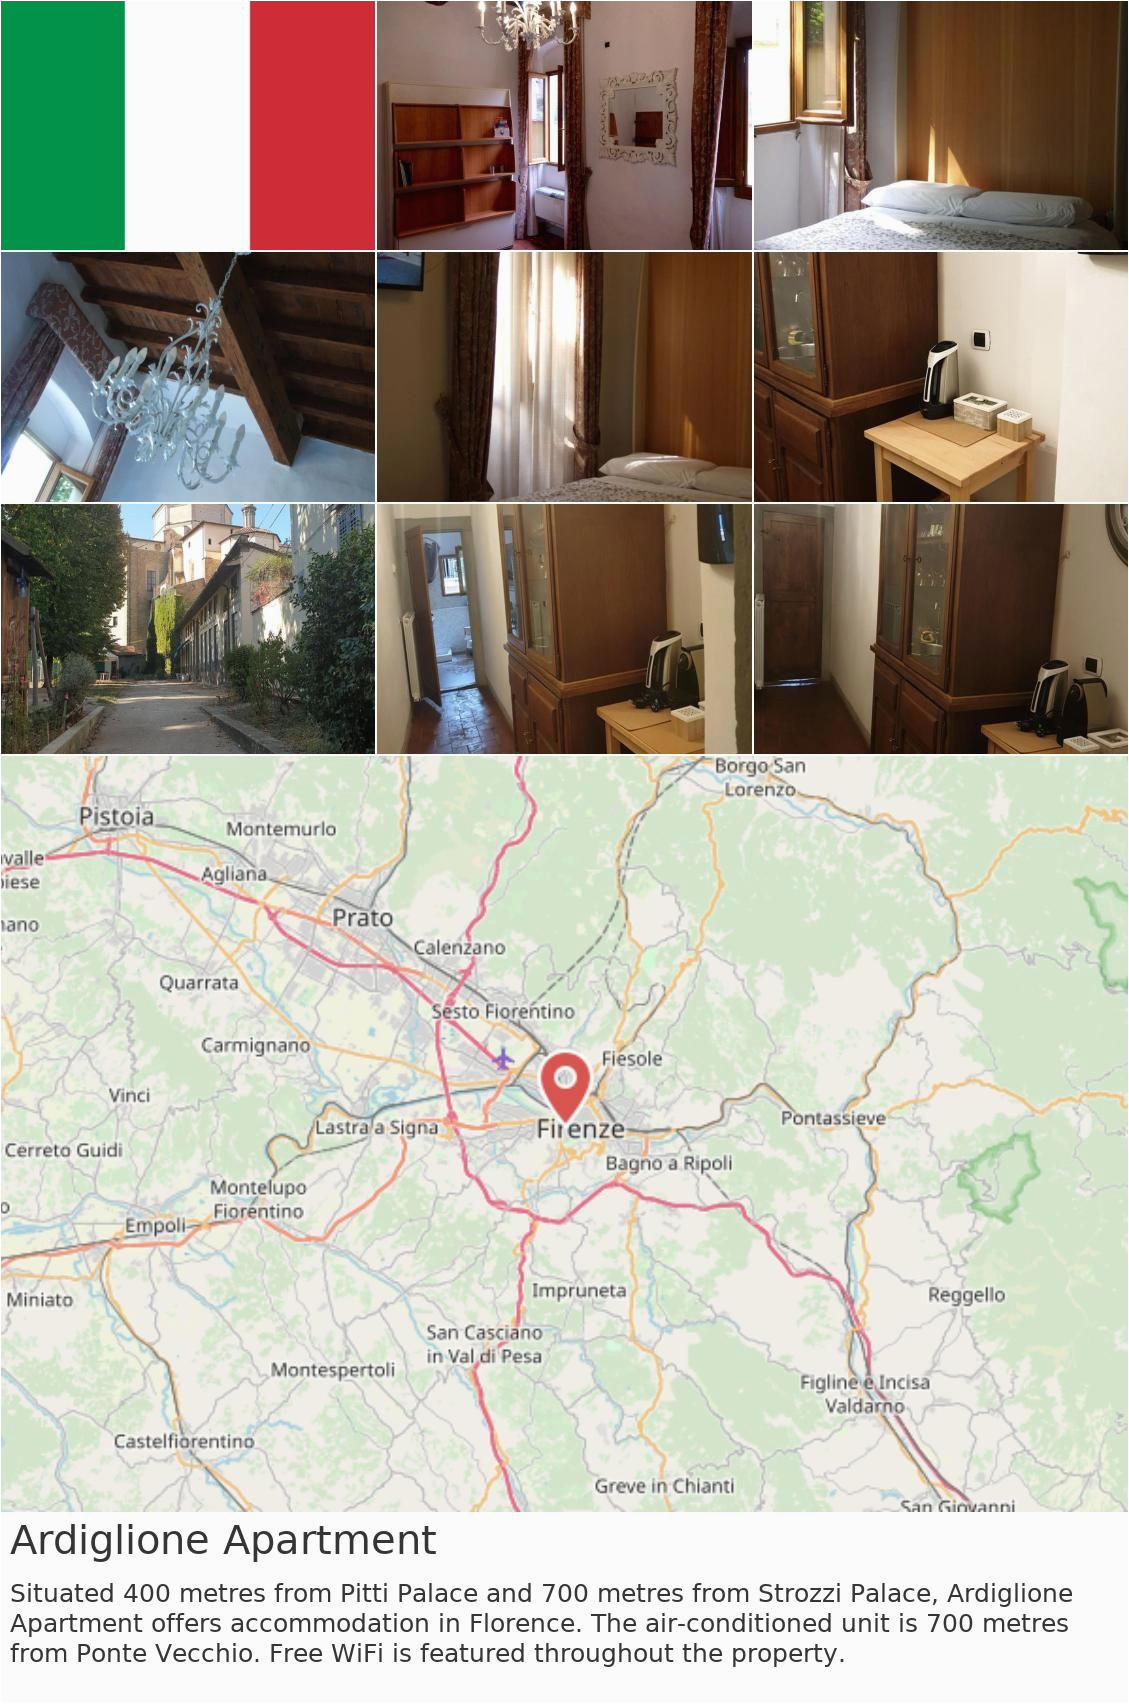 ardiglione apartment in 2019 italy italy free wifi florence